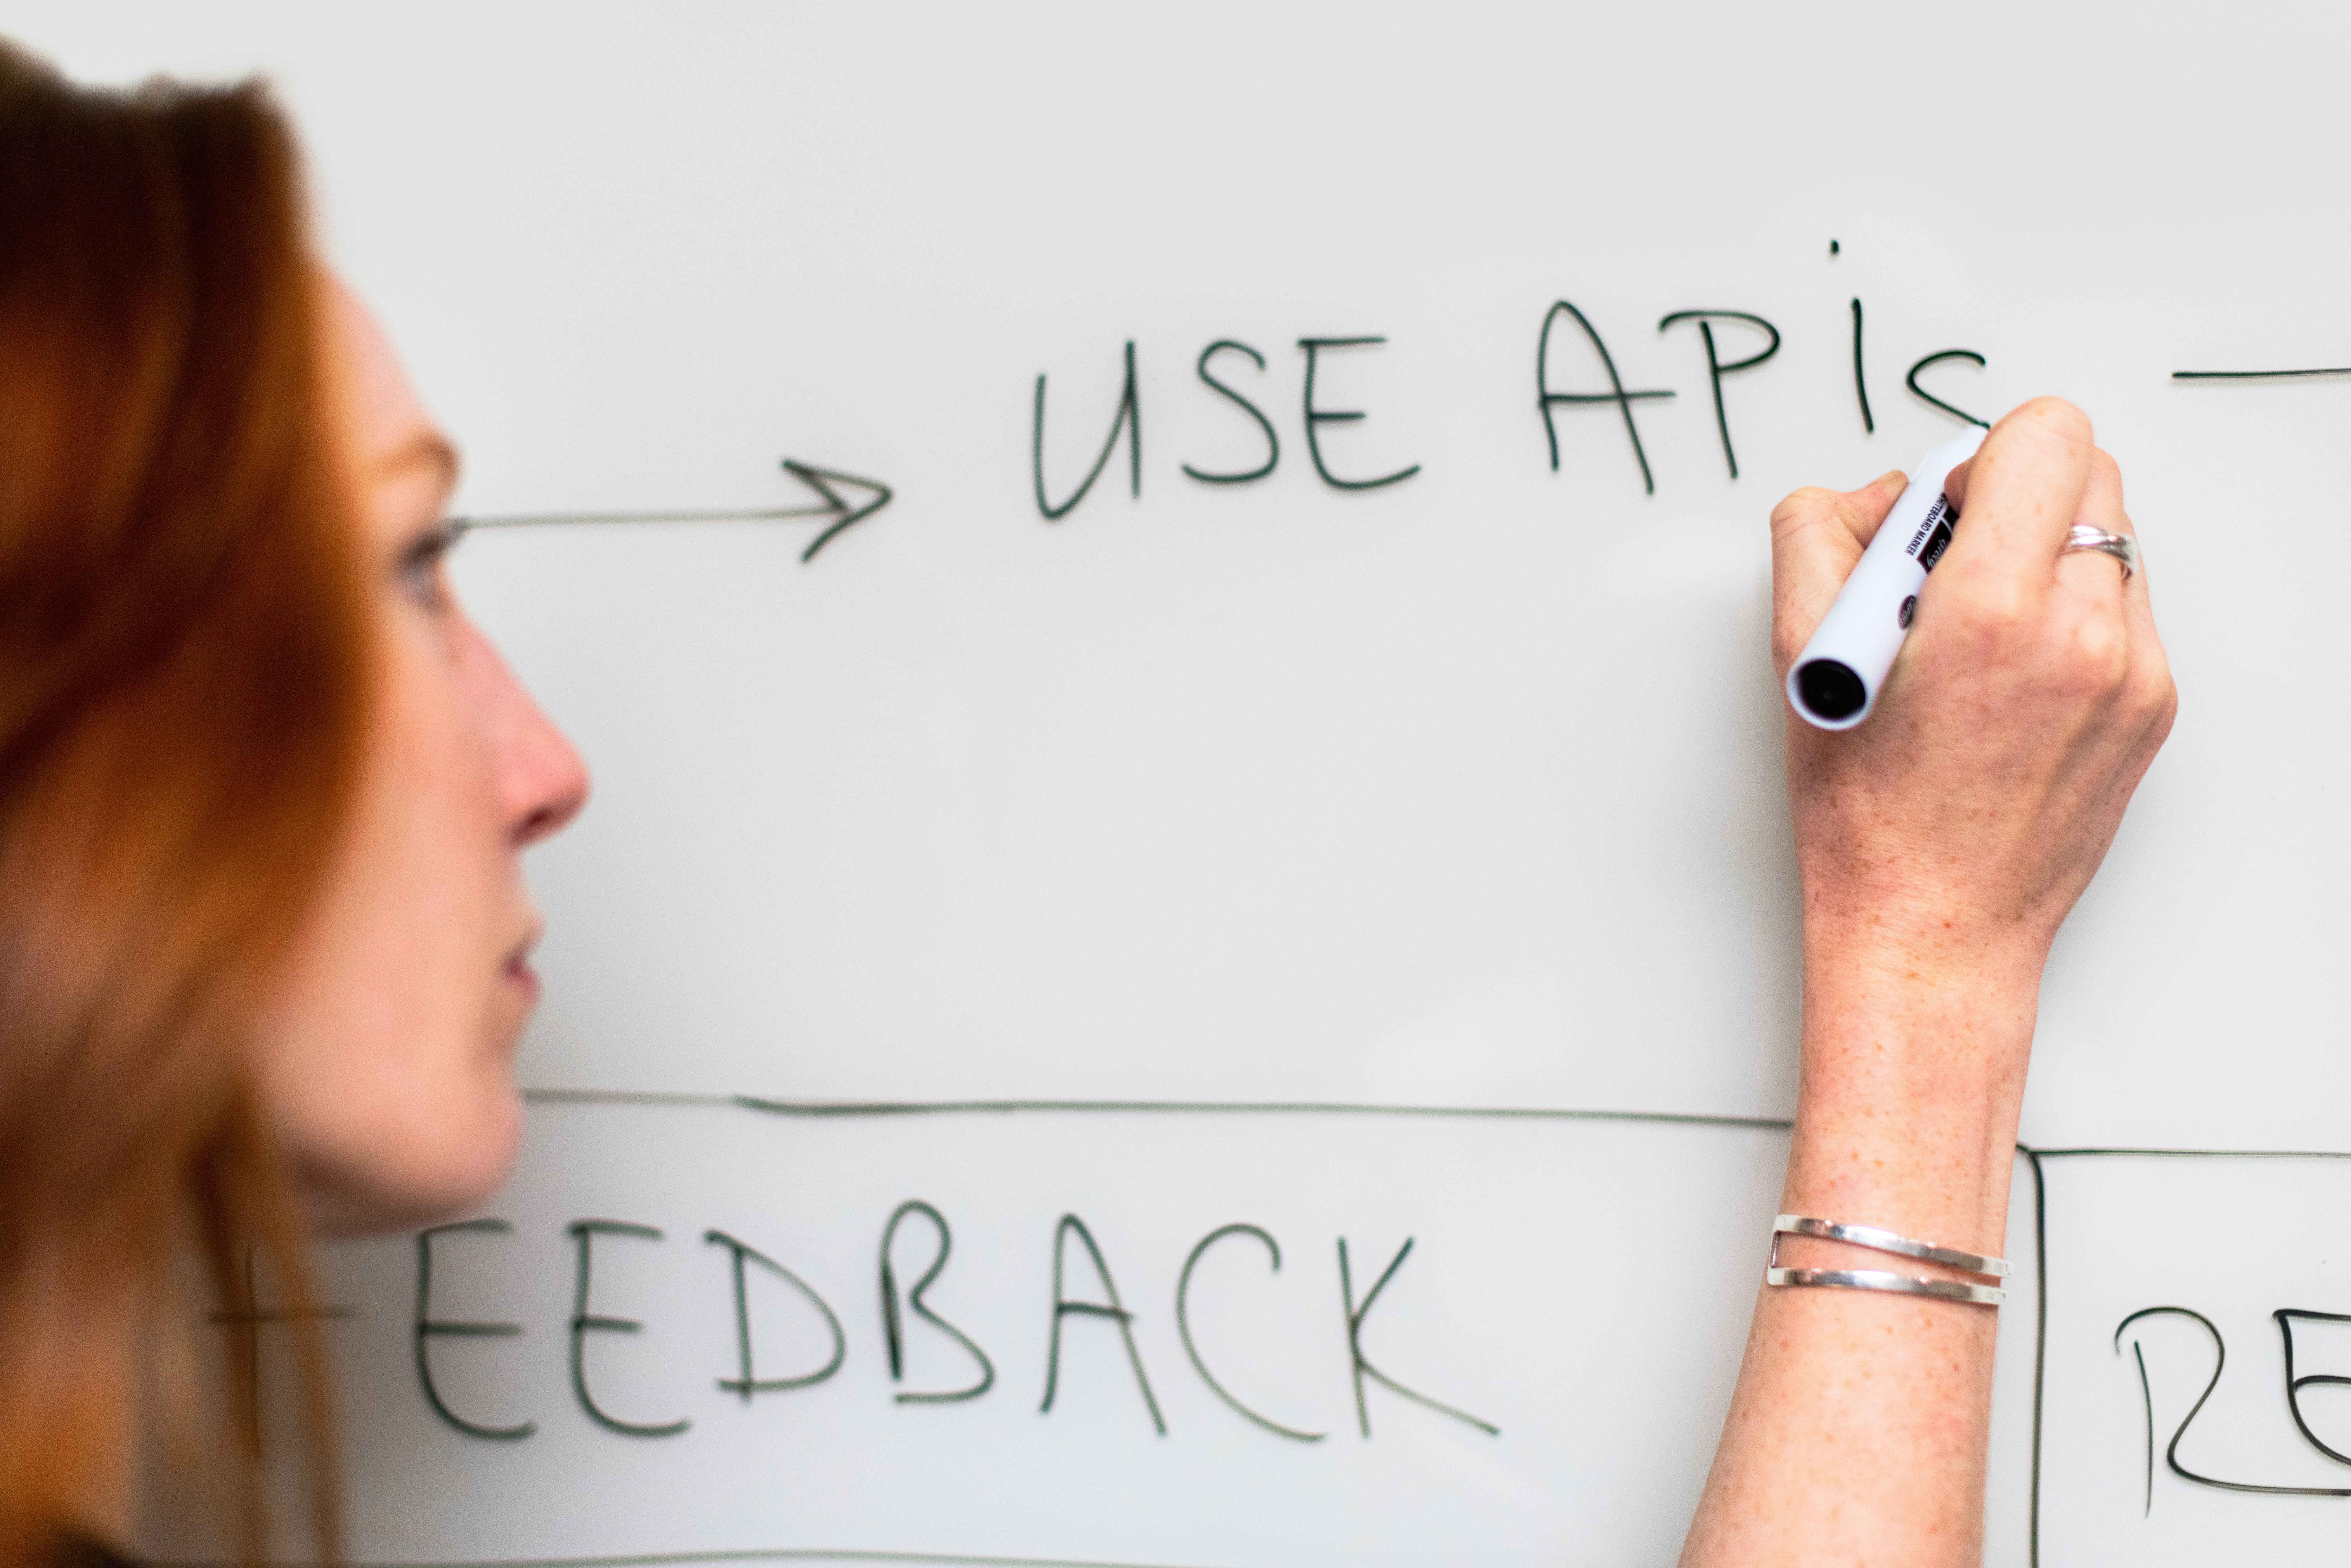 A really good image of a red haired woman writing "use APIs" on a whiteboard